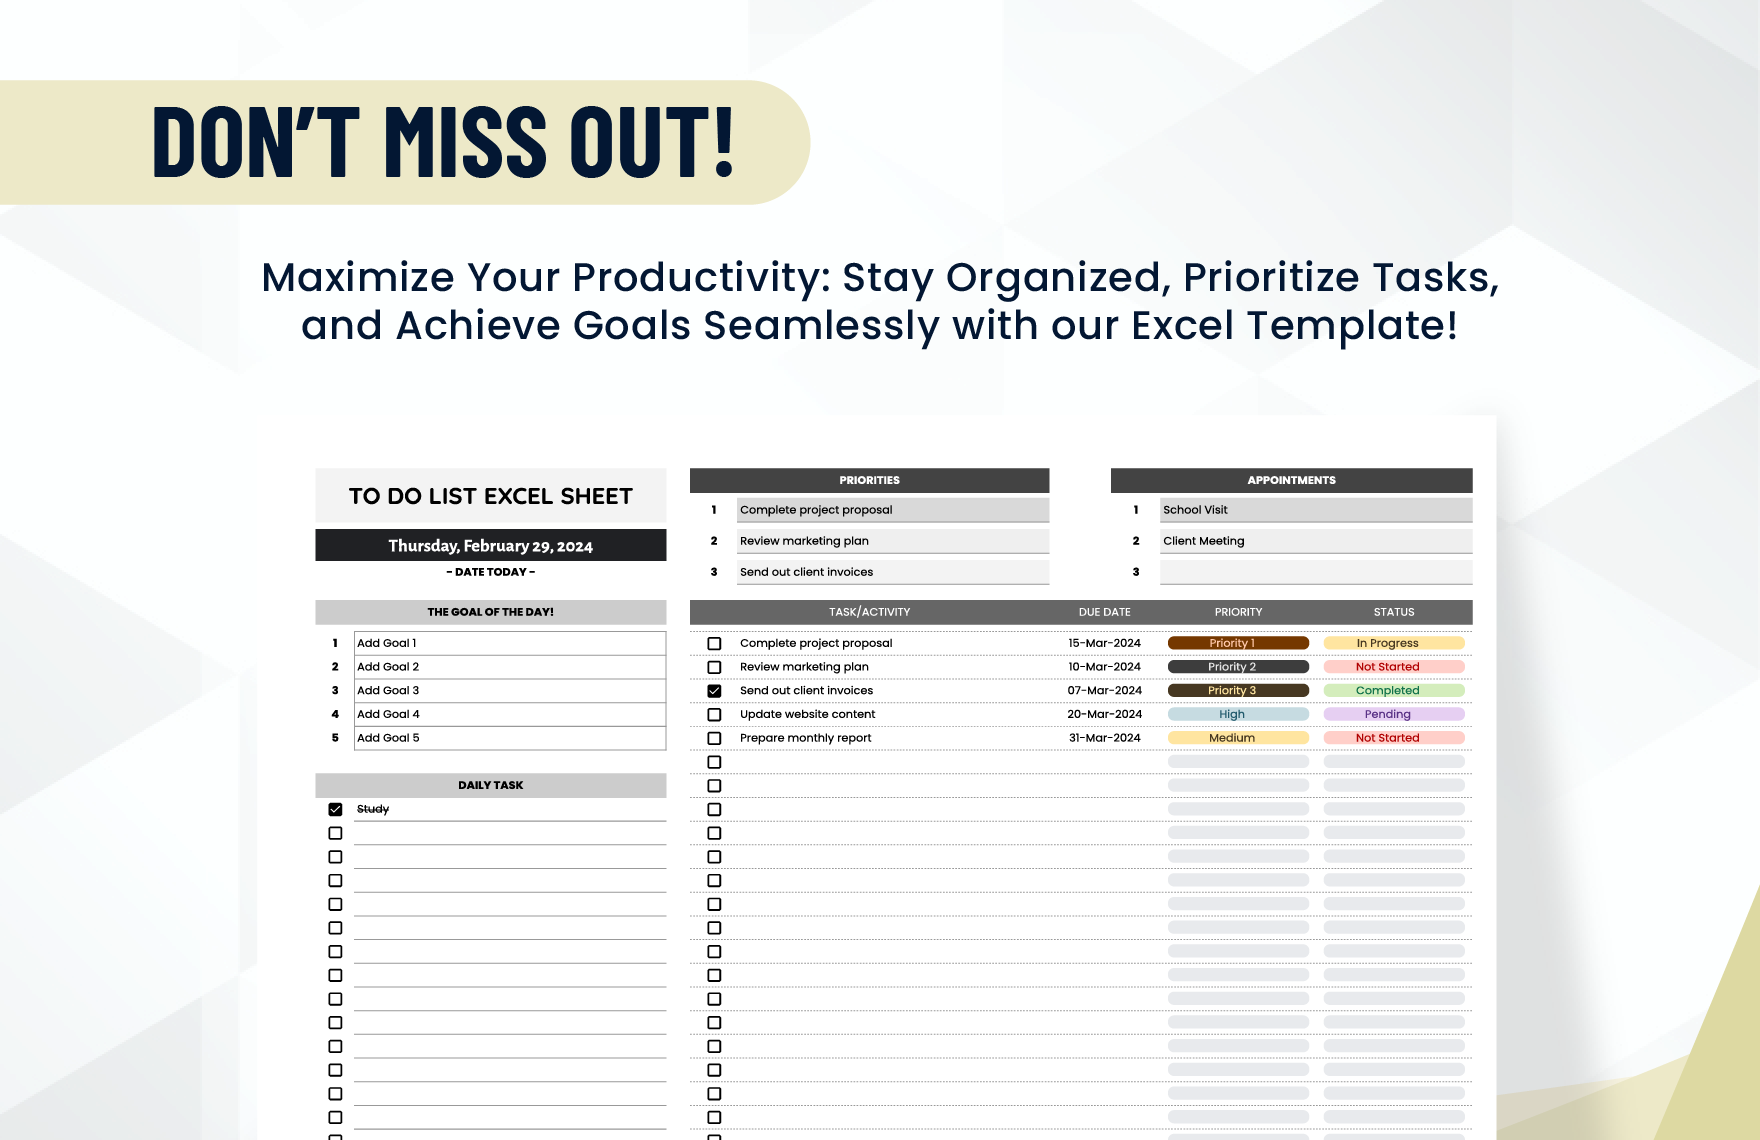 To Do List Excel Sheet Template